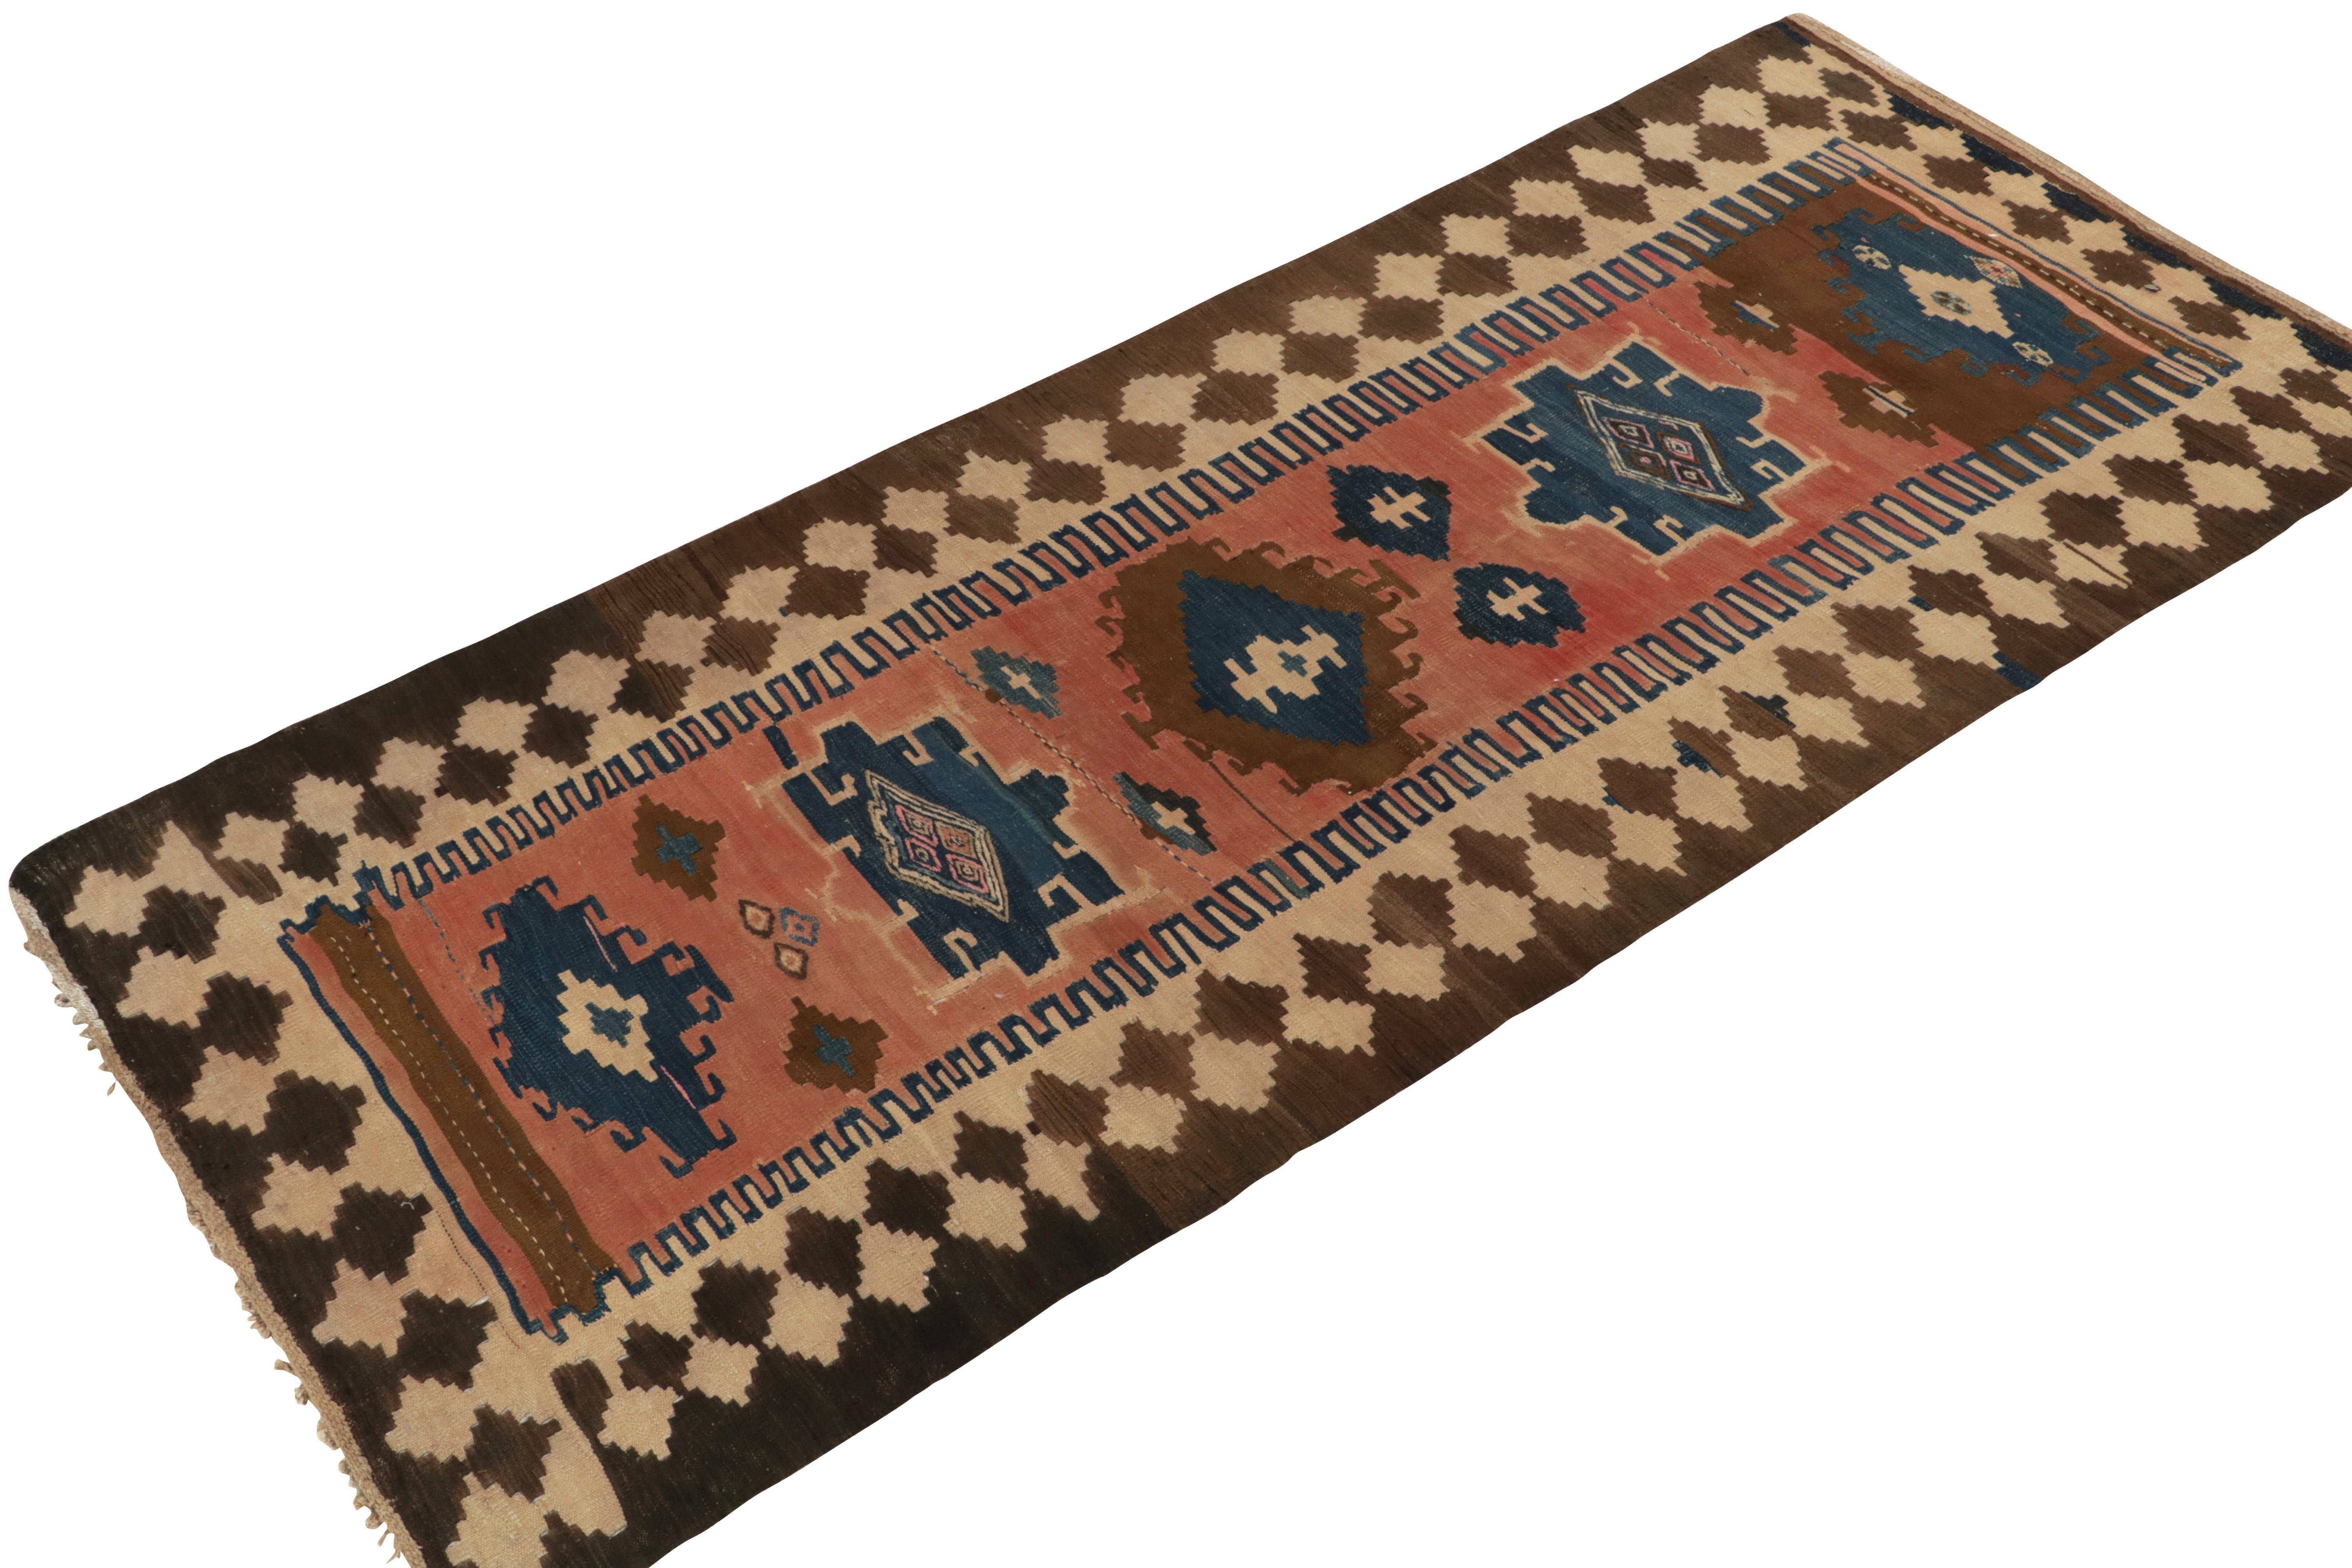 Handwoven in wool from Turkey circa 1950-1960, a unique mid-century kilim rug now joining our vintage flat weaves. 

The most unusual design revels in a rust pink background playing with blue and beige-brown, playing beautifully with the mild